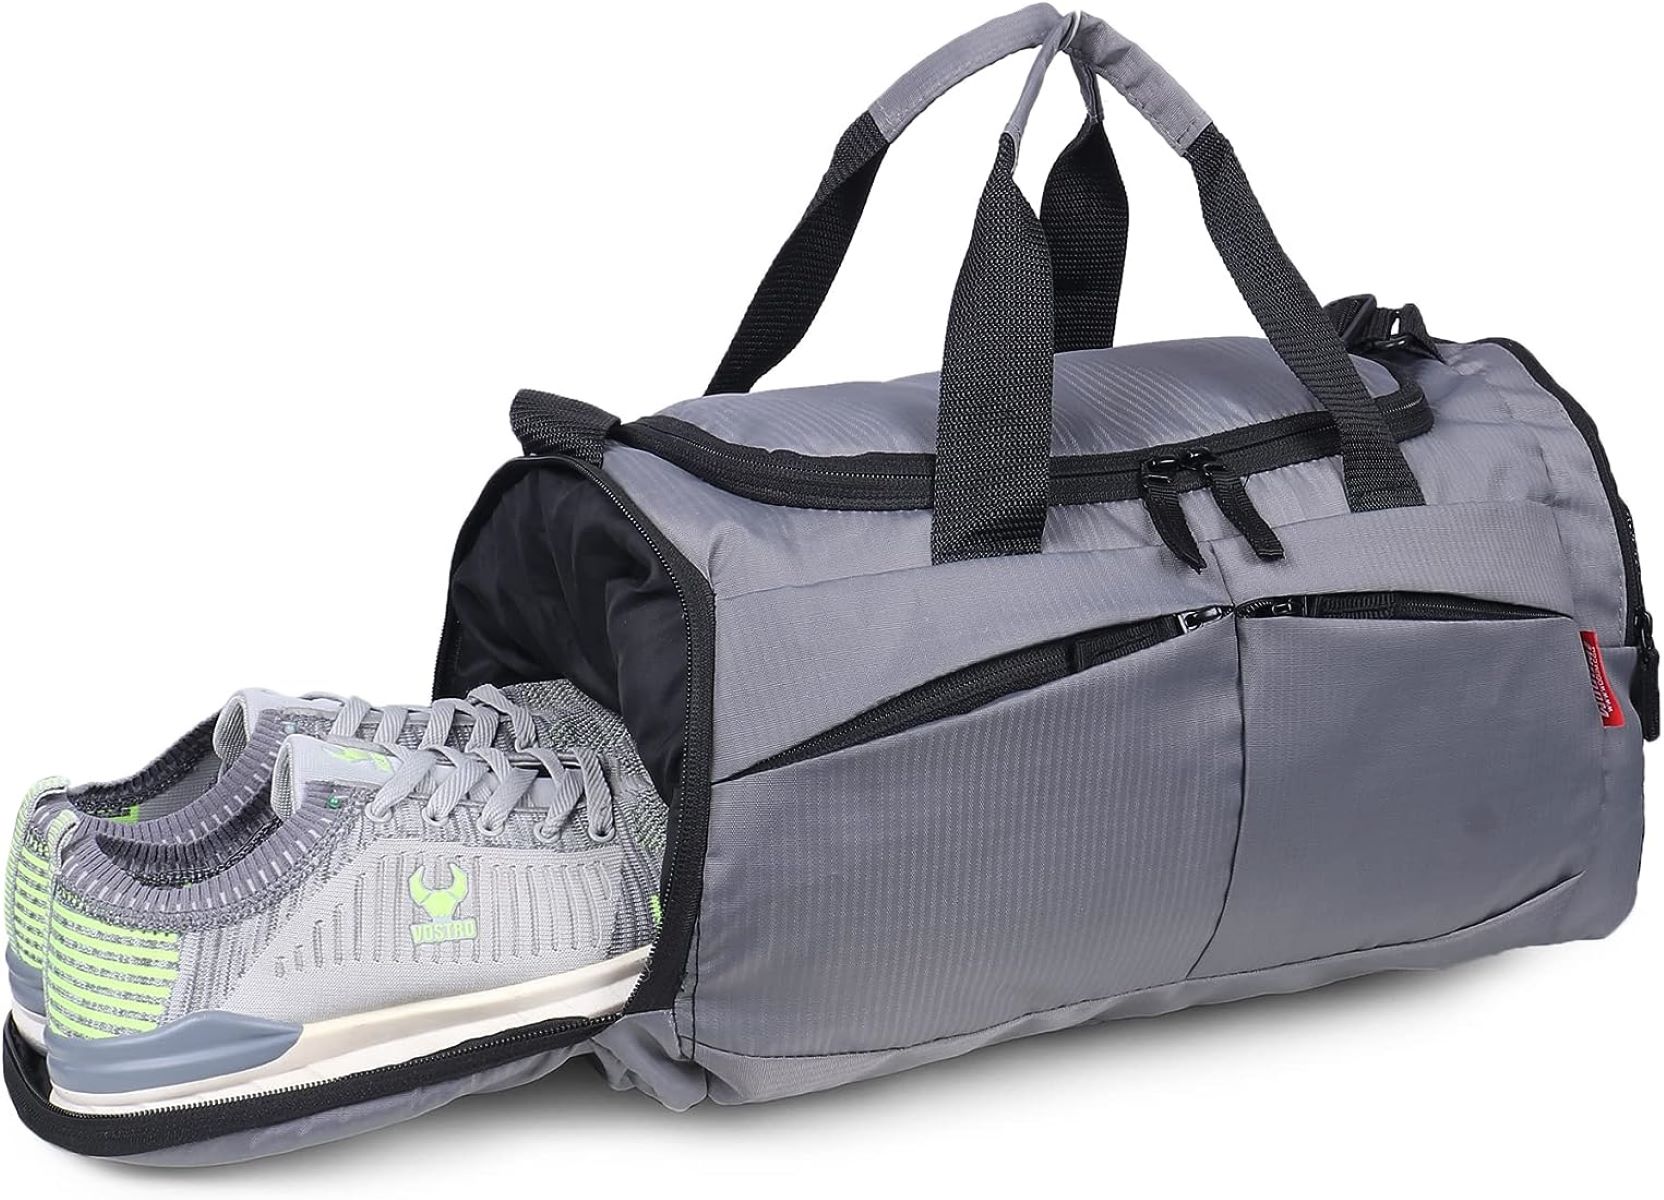 travel bags with shoes compartment